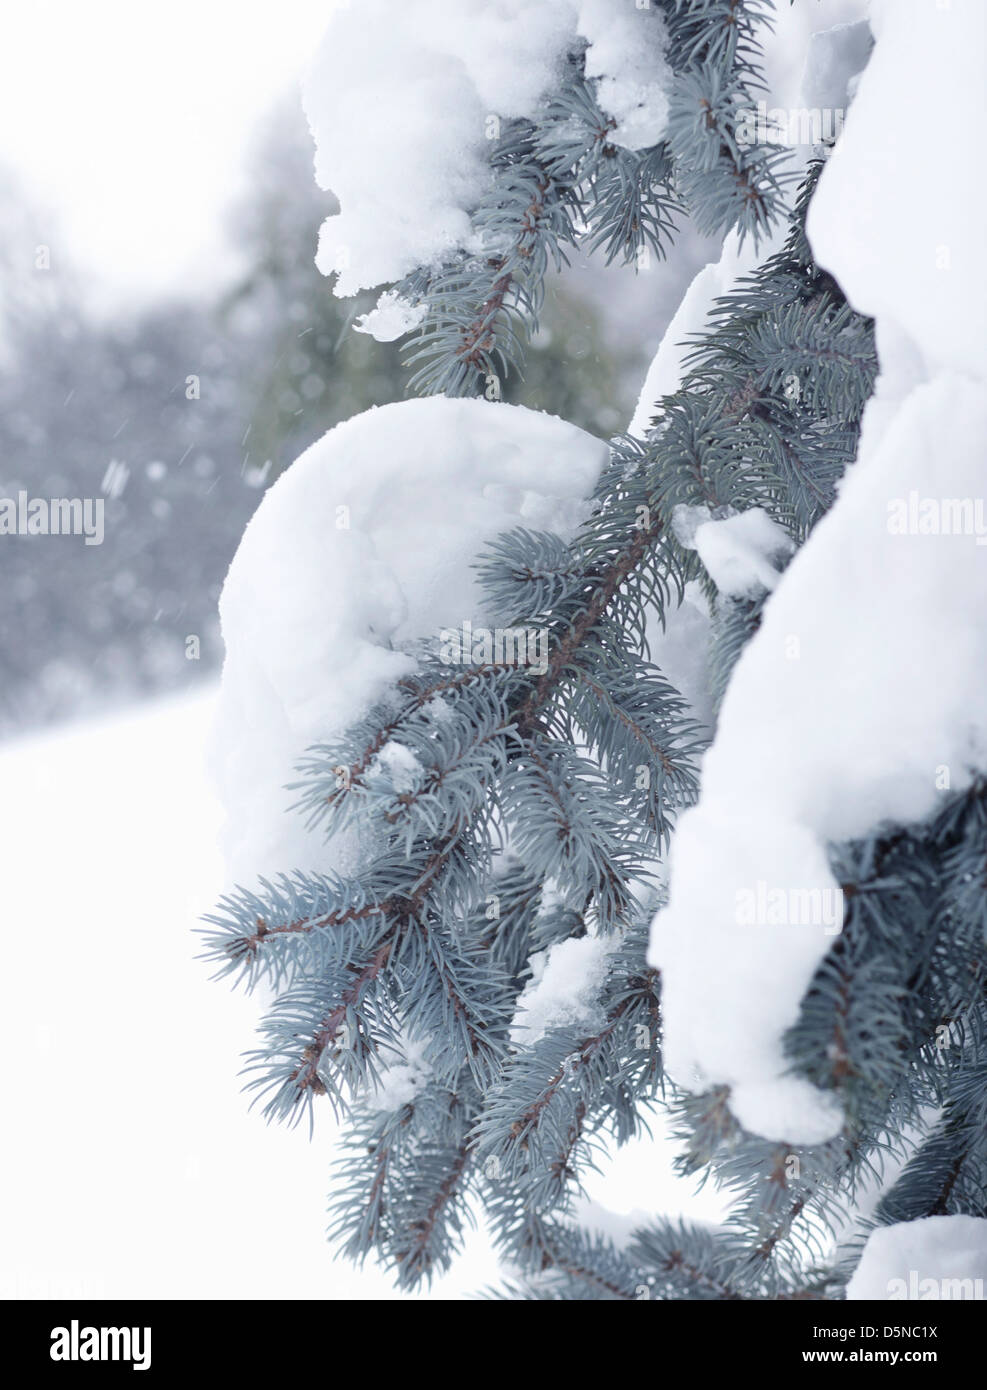 Snow falling on a blue spruce branch. Stock Photo